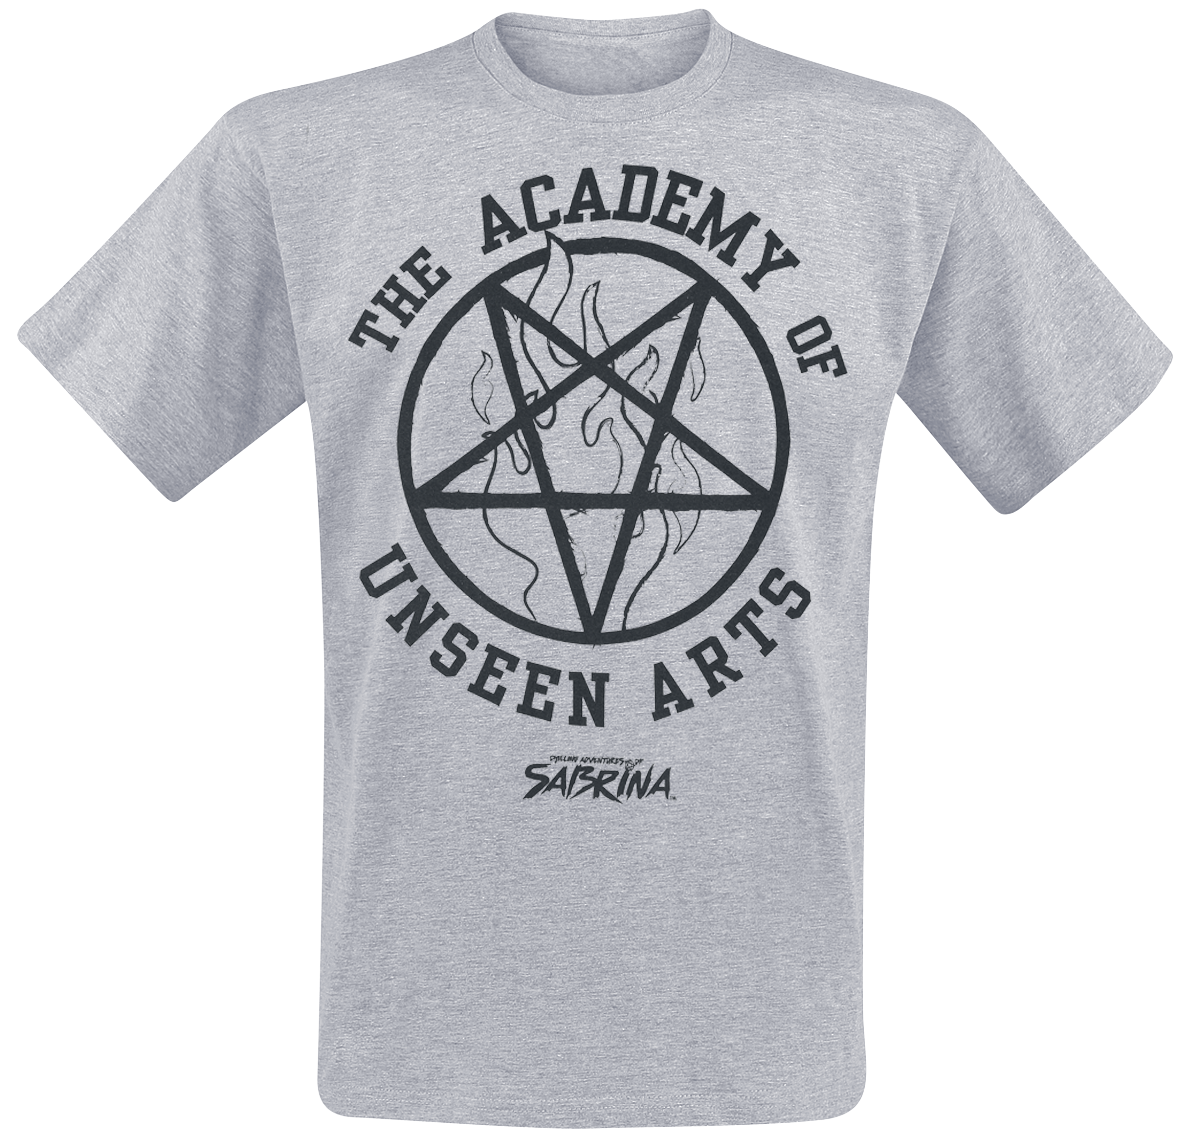 Sabrina - The Academy Of Unseen Arts - T-Shirt - mottled grey image